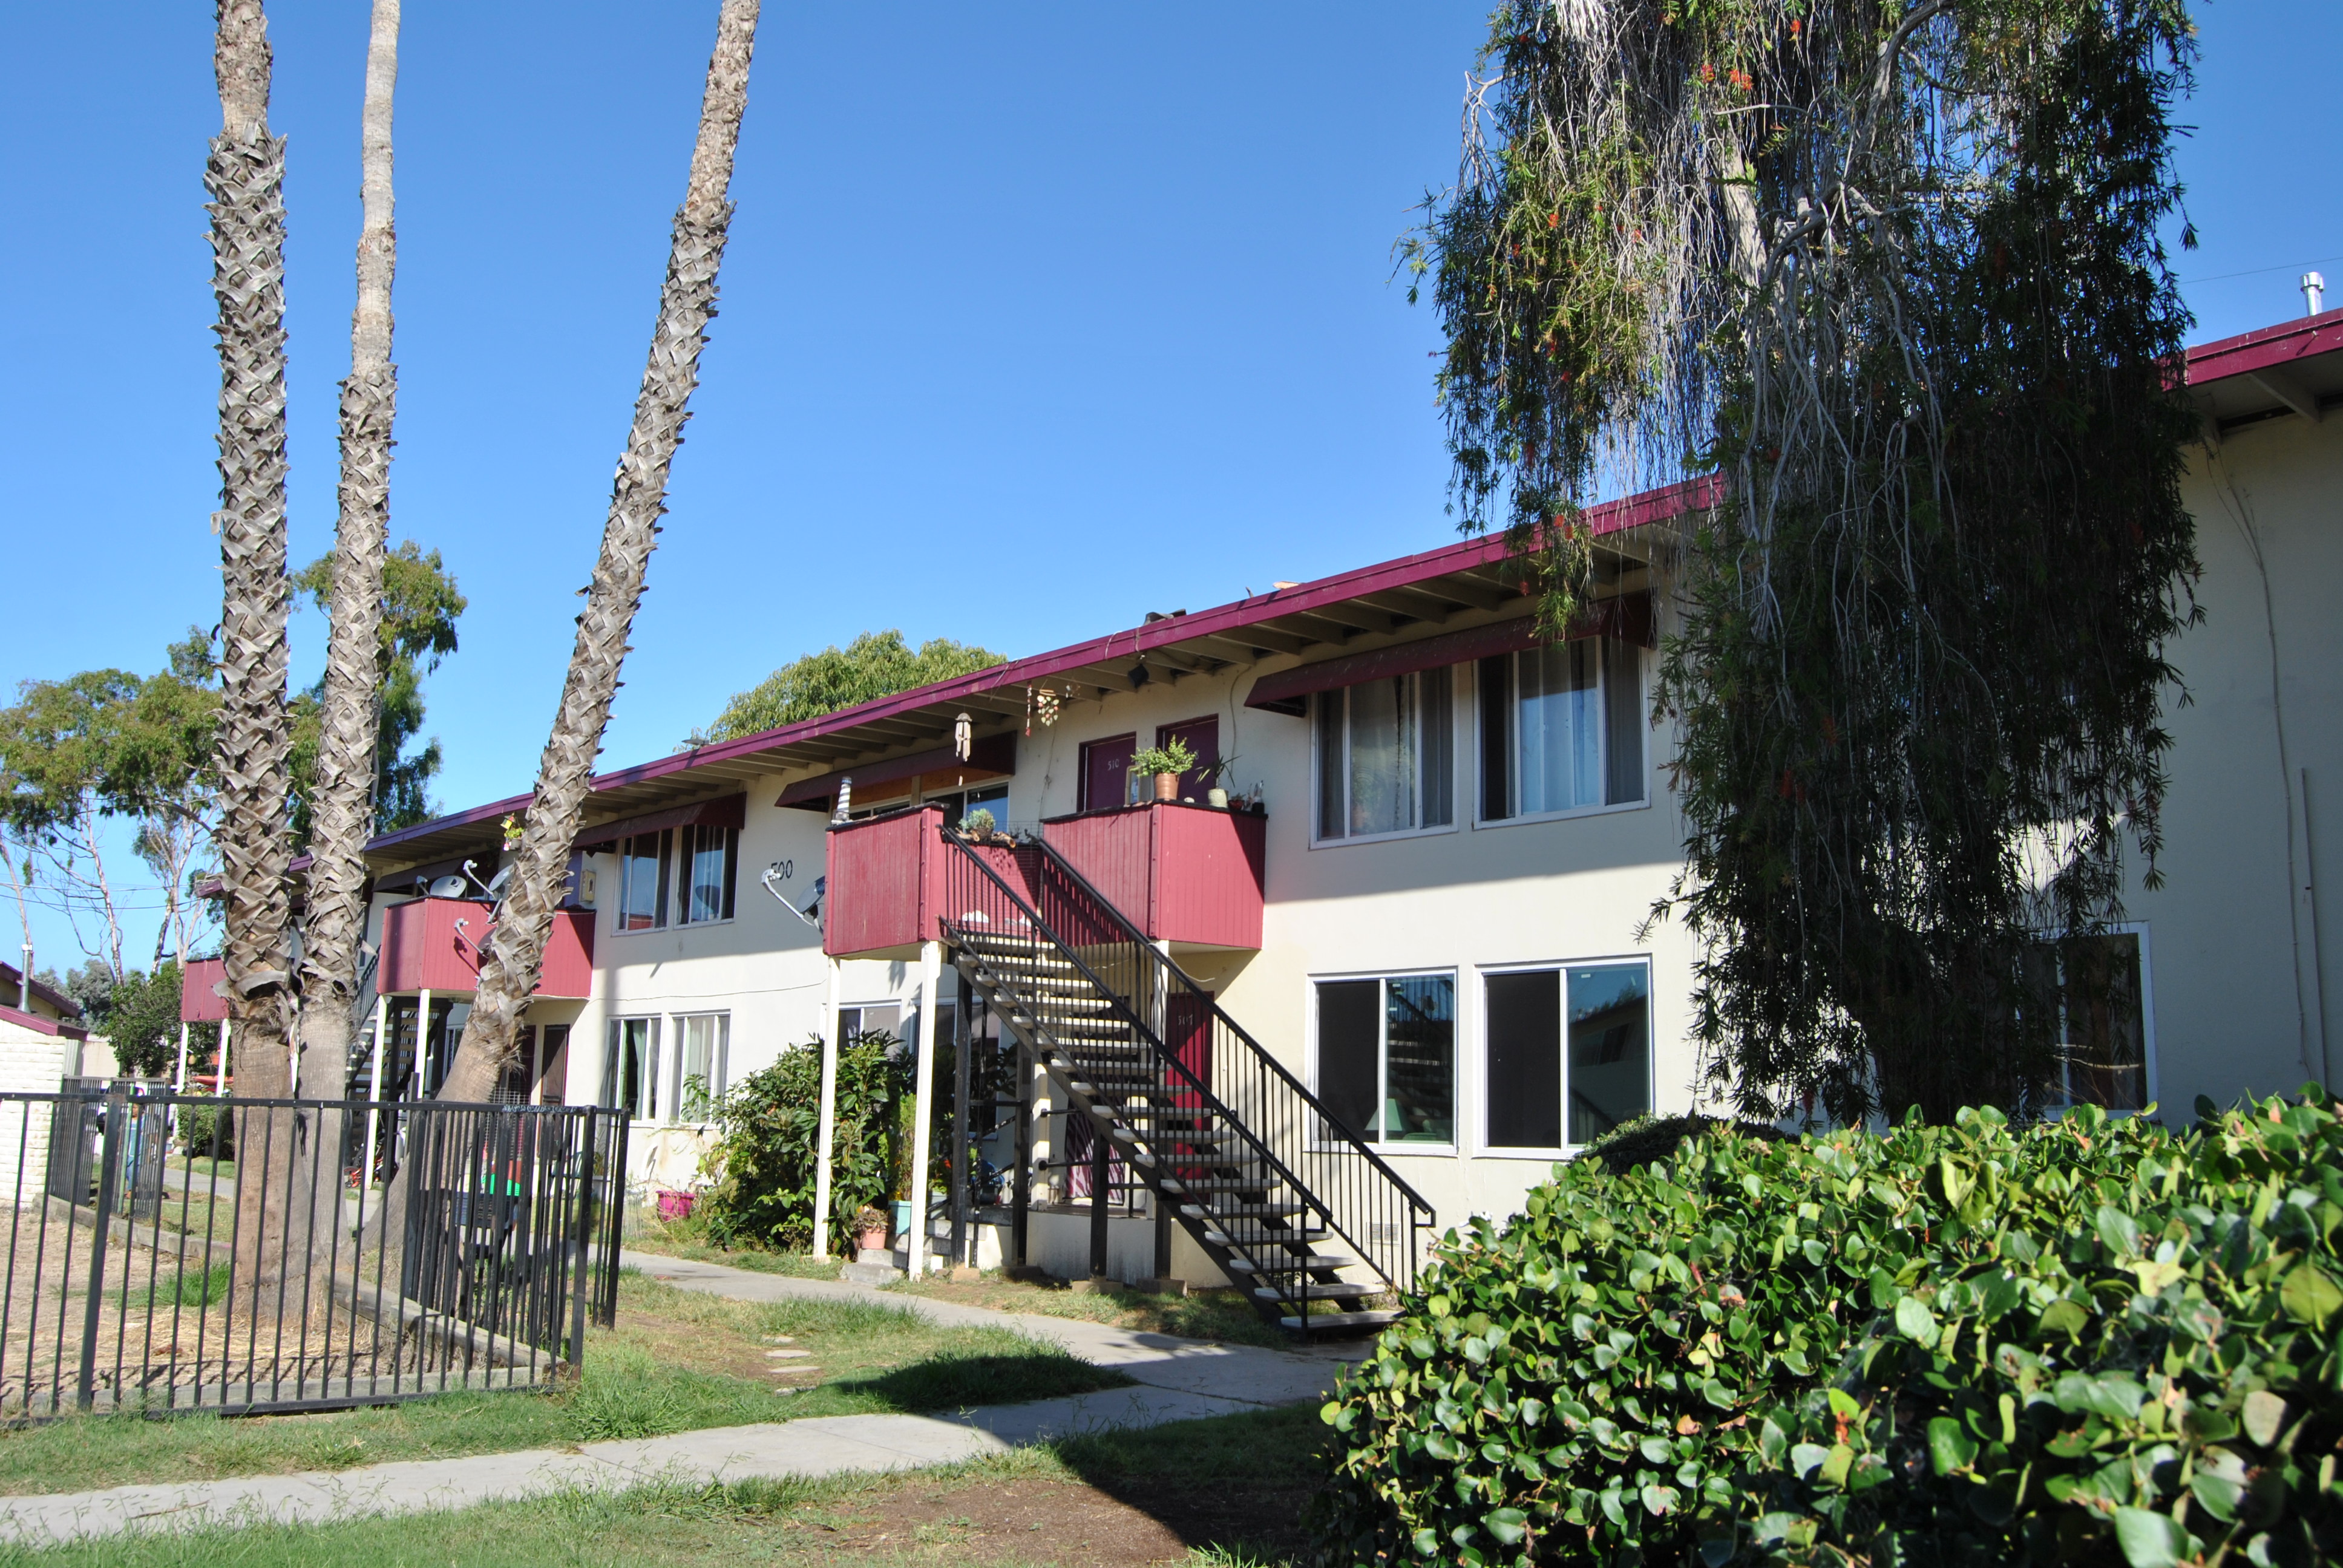 Grant Street Villas was built in 1953 and features eight two story buildings, situated on 3.15 acres.